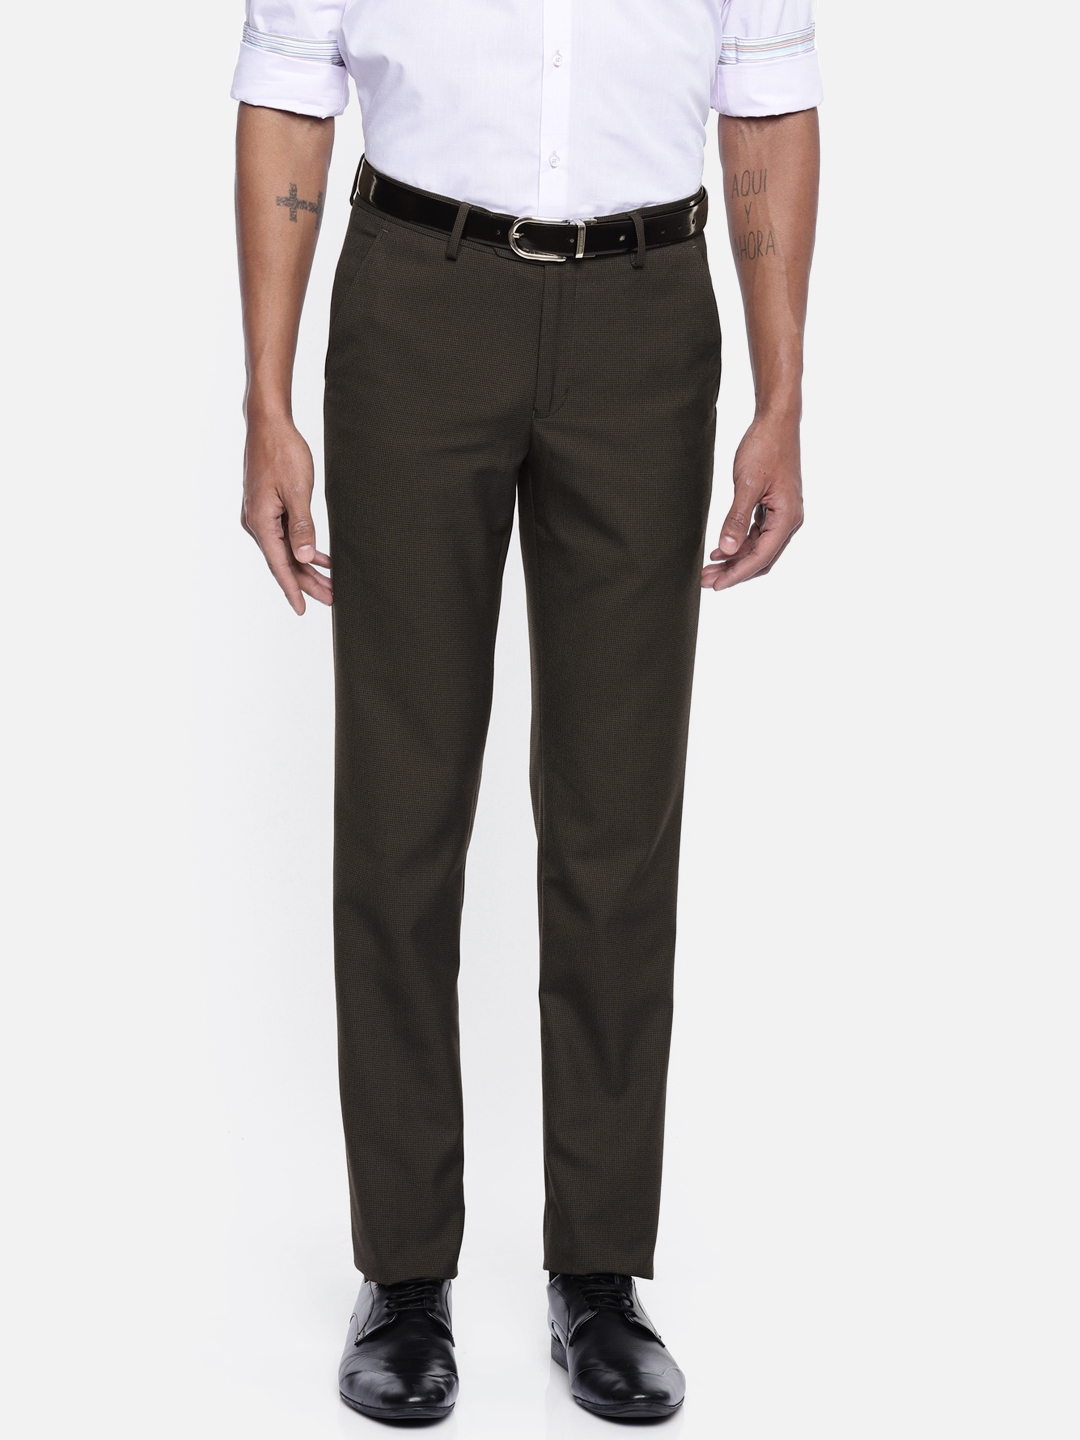 Buy Men Beige Solid Carrot Fit Casual Trousers Online  790594  Peter  England